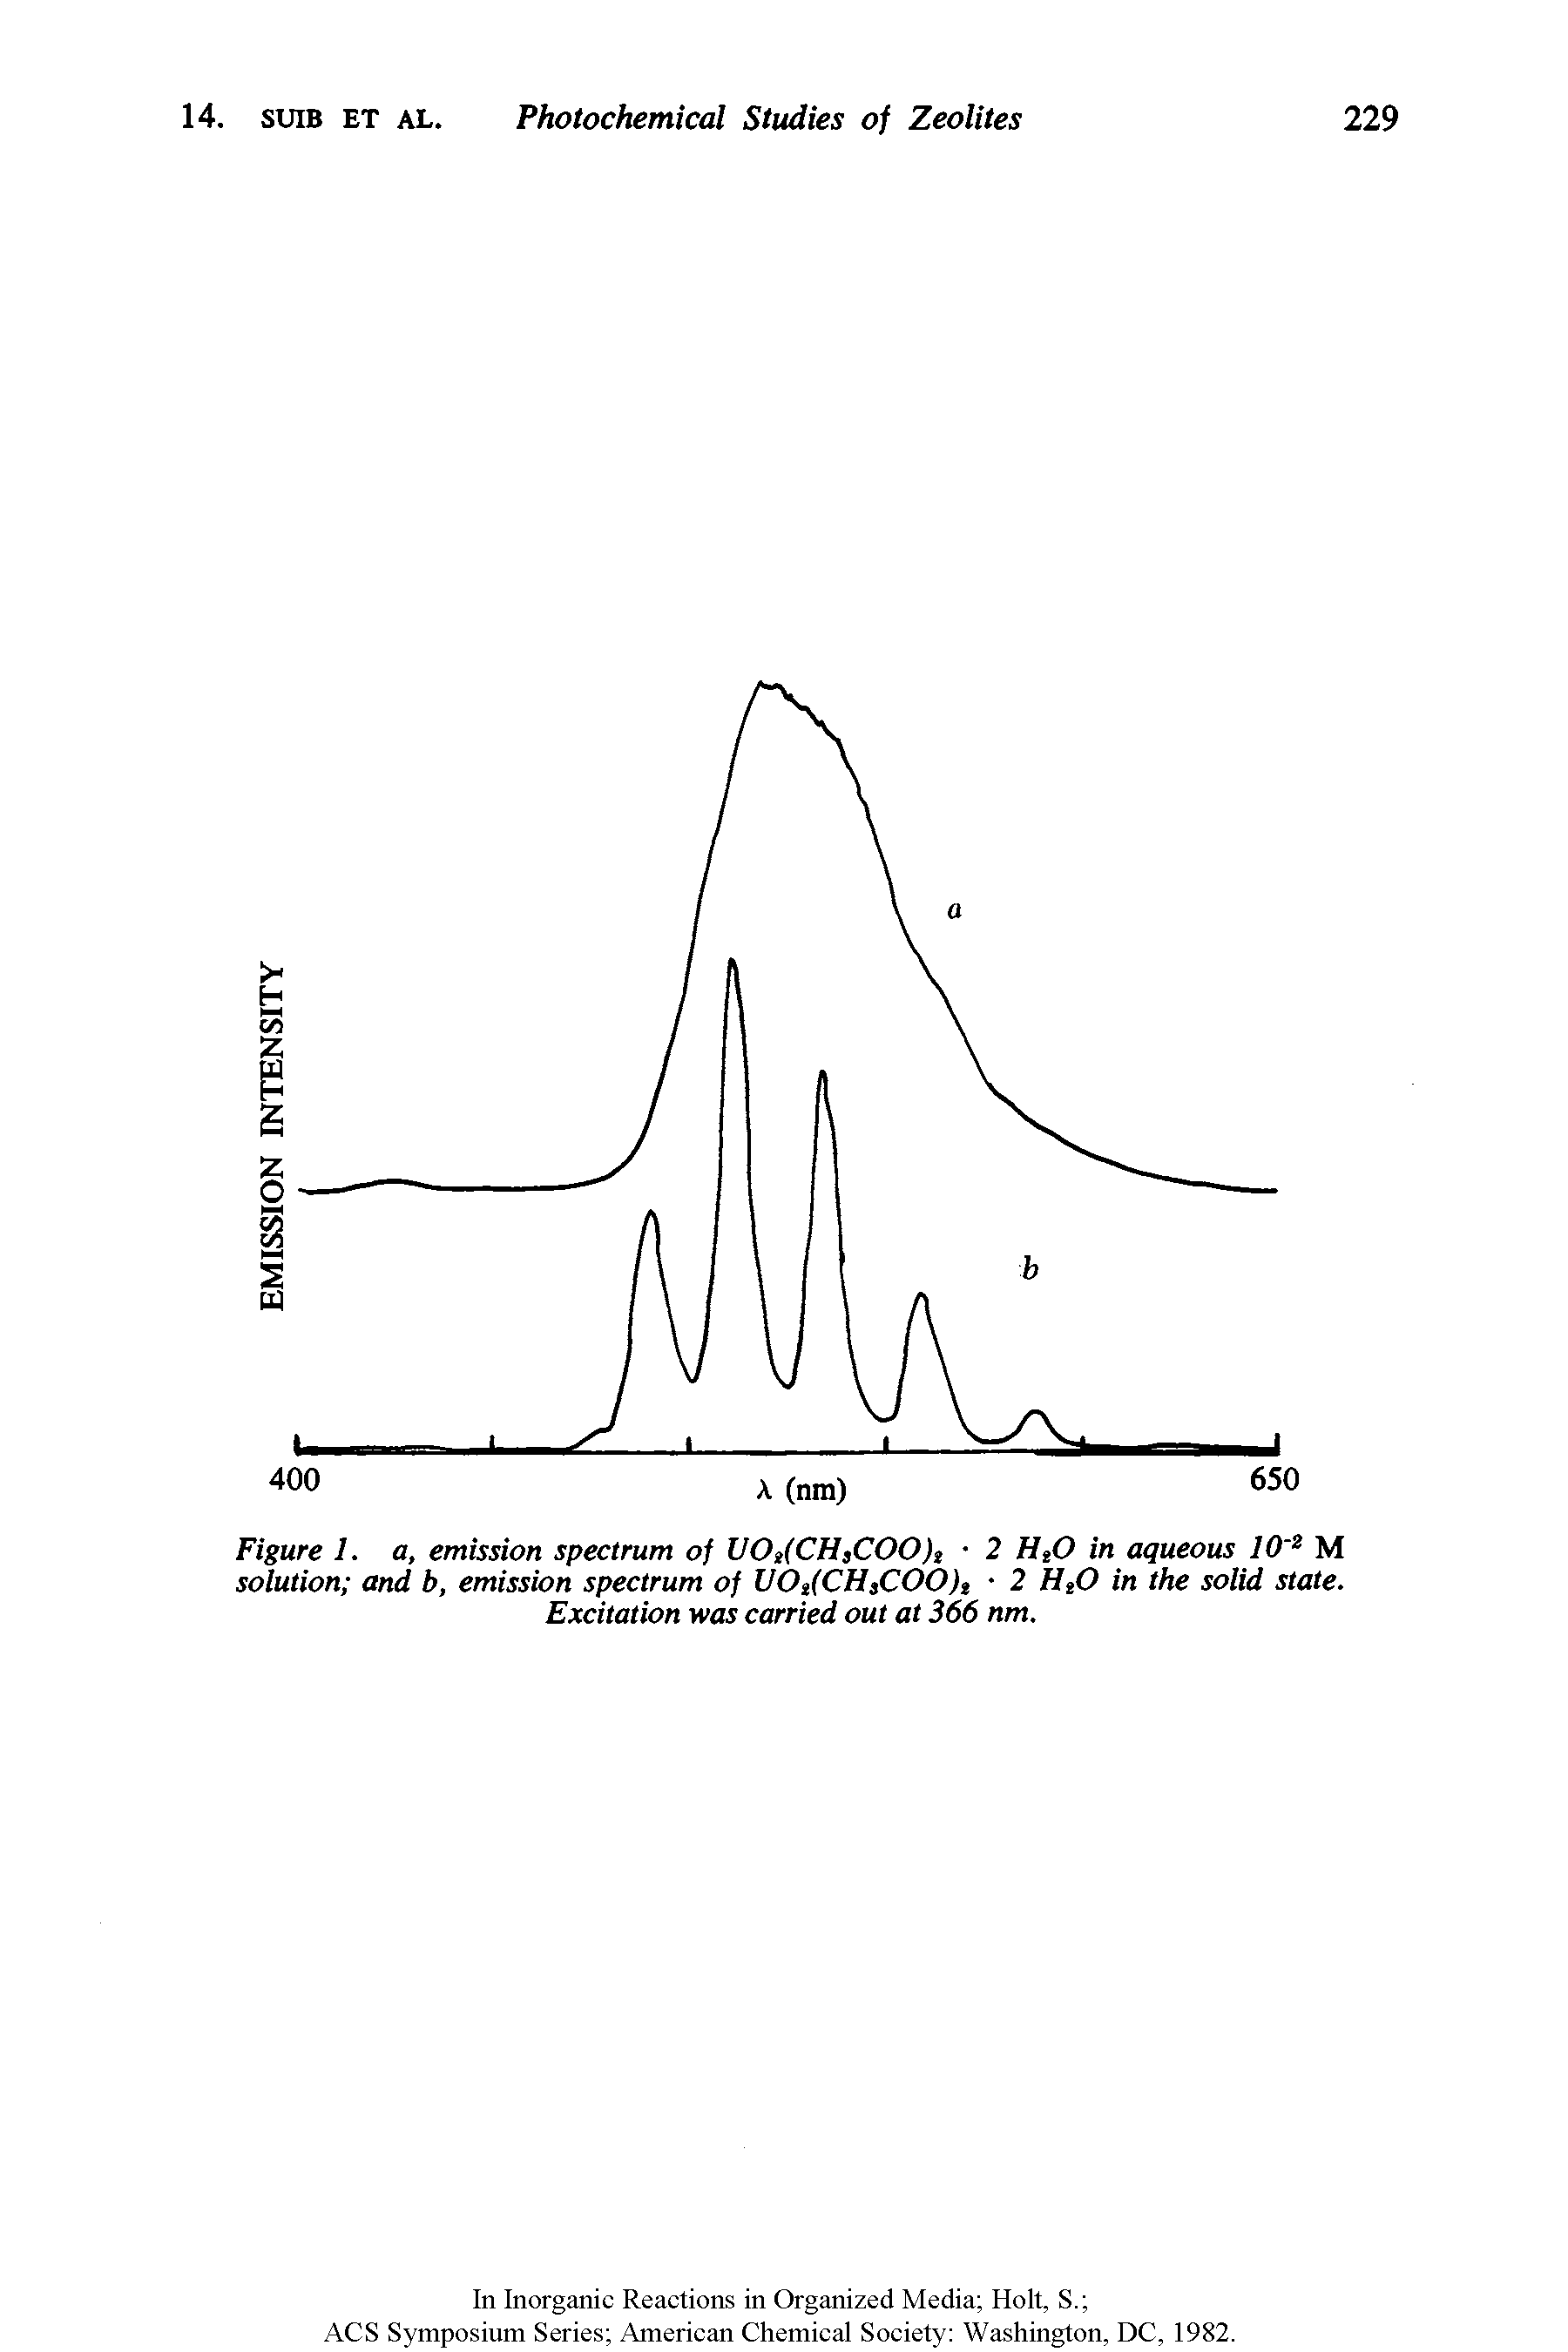 Figure I. a, emission spectrum of UOa(CH)COO)t 2 HtO in aqueous 10 M soiution and b, emission spectrum of UOt(CH)COO)i 2 HiO in the solid state. Excitation was carried out at 366 nm.